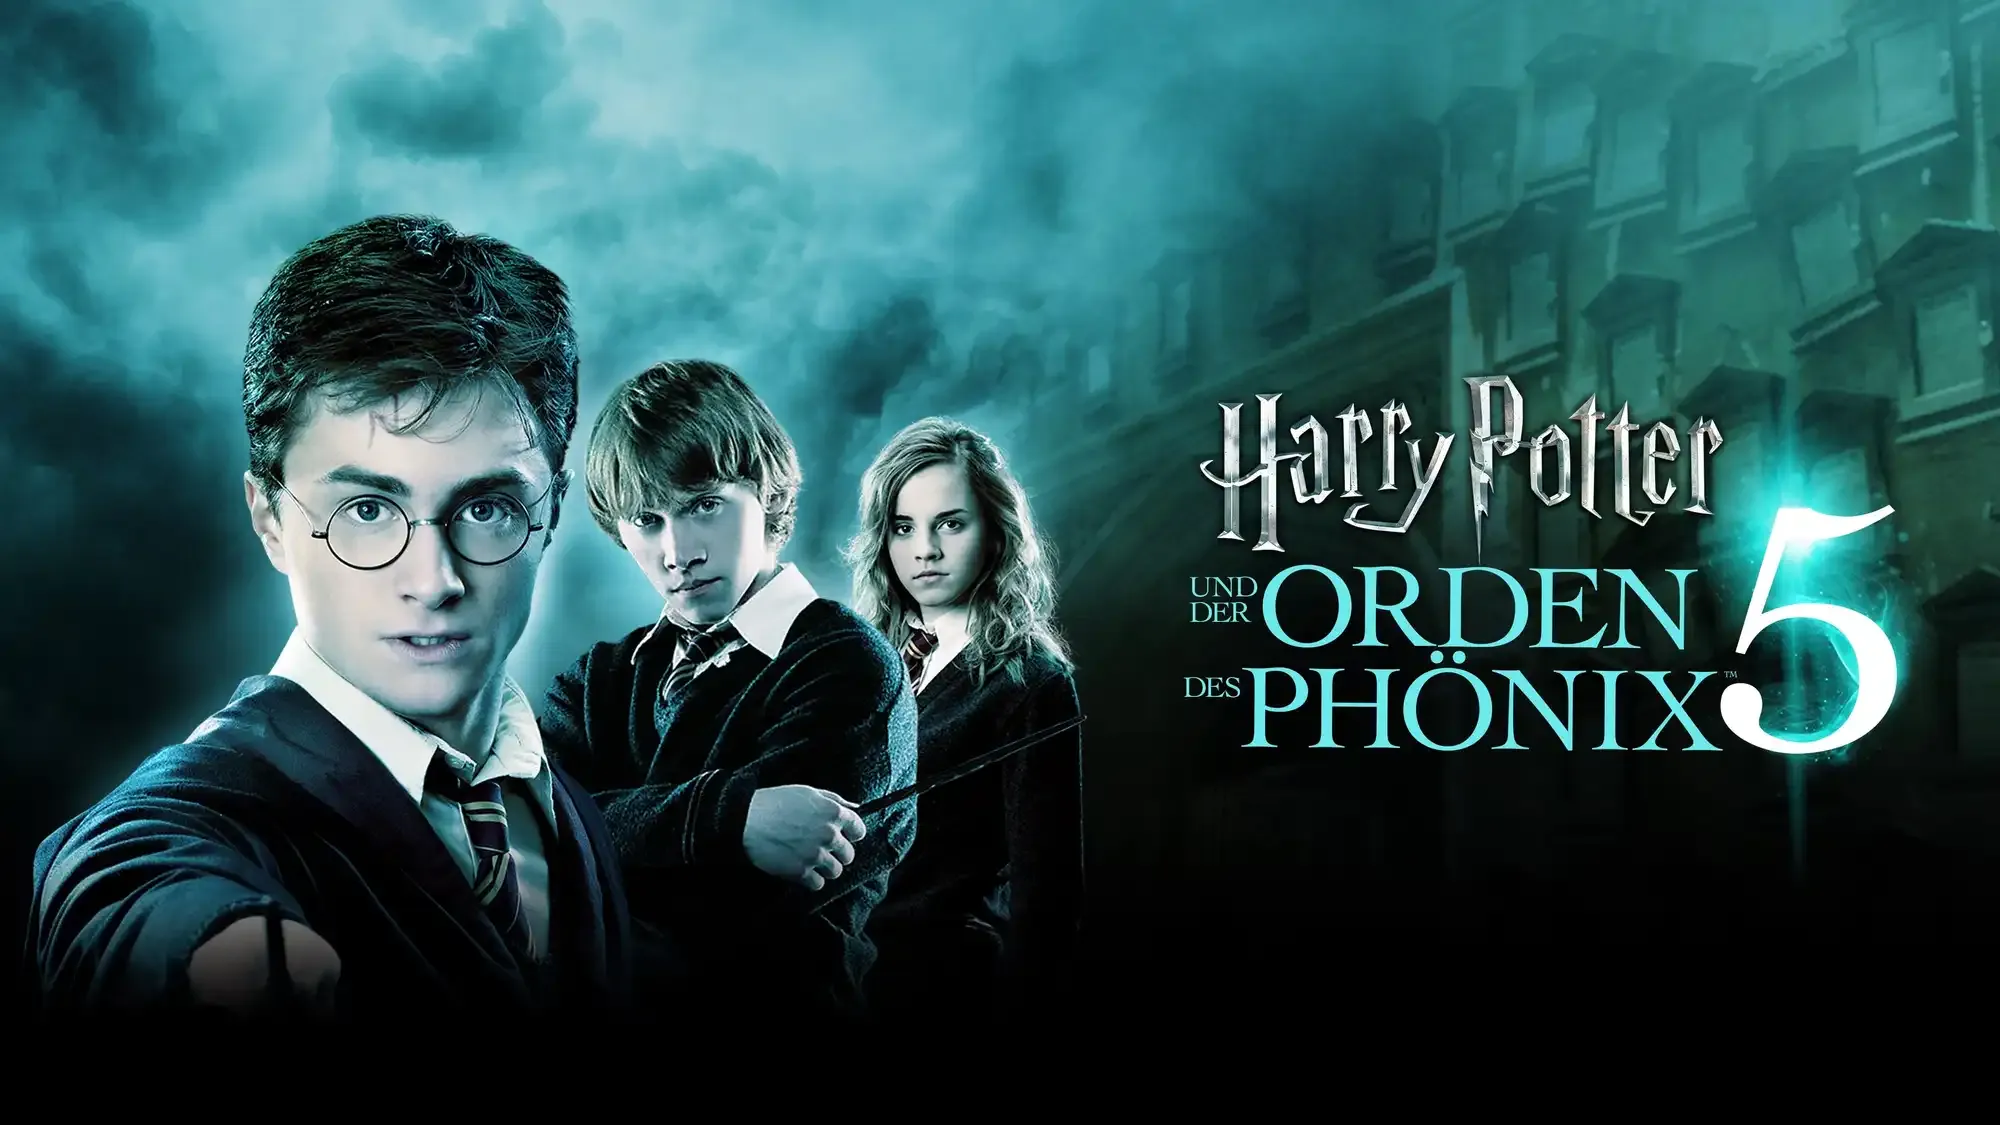 Harry Potter and the Order of the Phoenix movie review